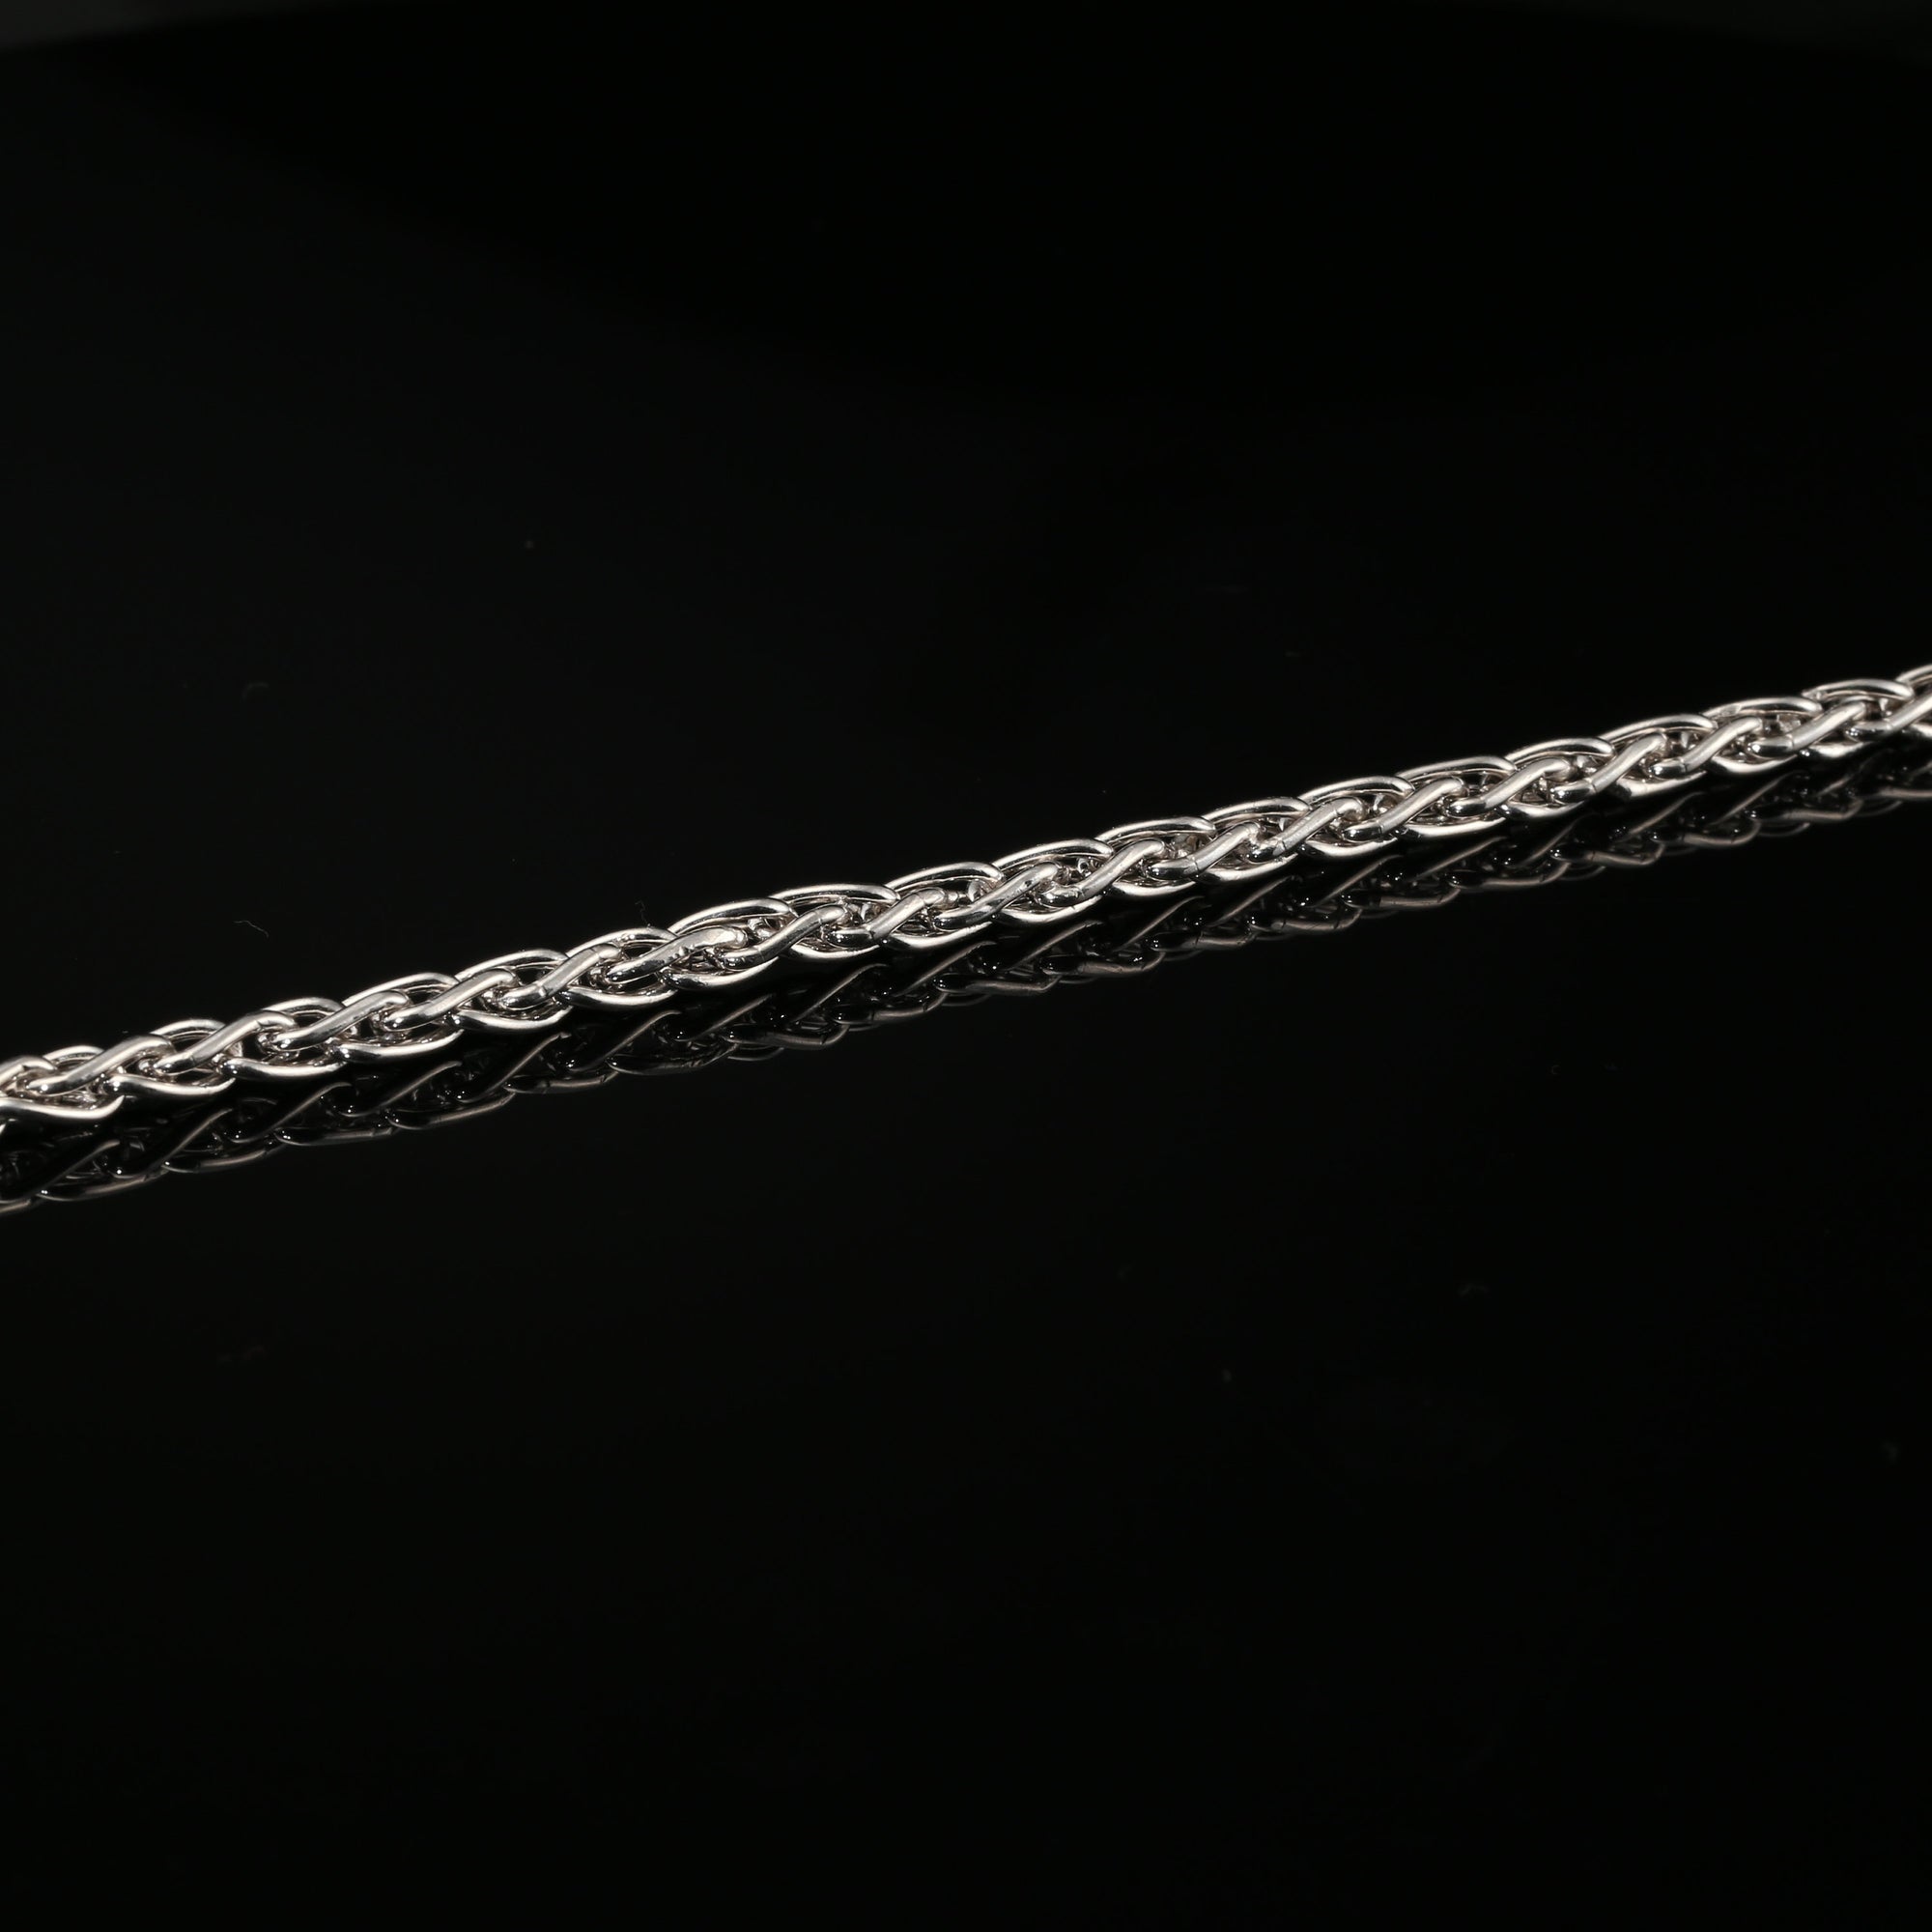 Byzantine Chain Thin Bracelet, 8.5&amp;quot;, Unisex in Sterling Silver